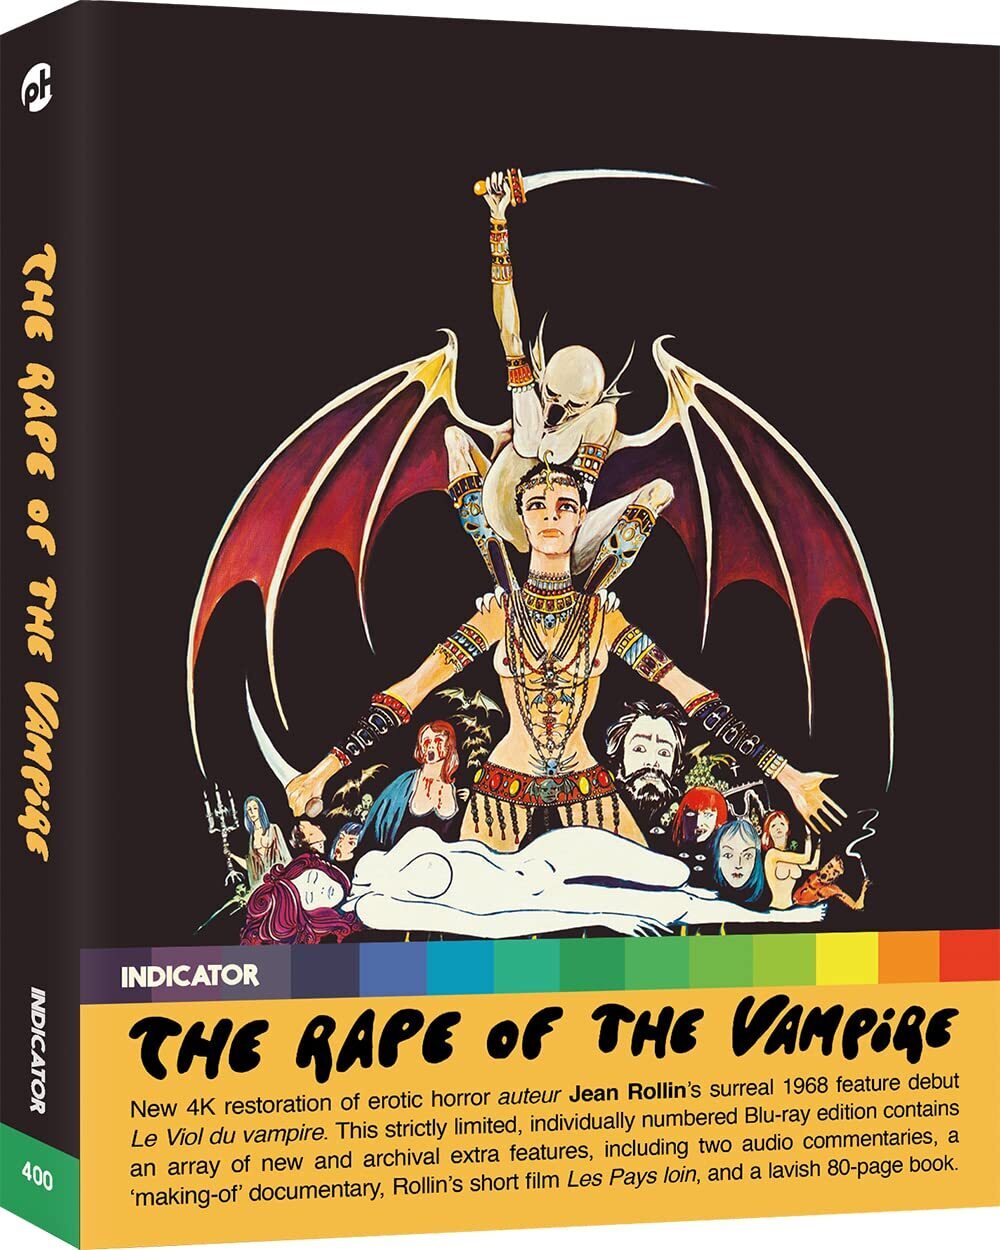 THE RAPE OF THE VAMPIRE (LIMITED EDITION) BLU-RAY